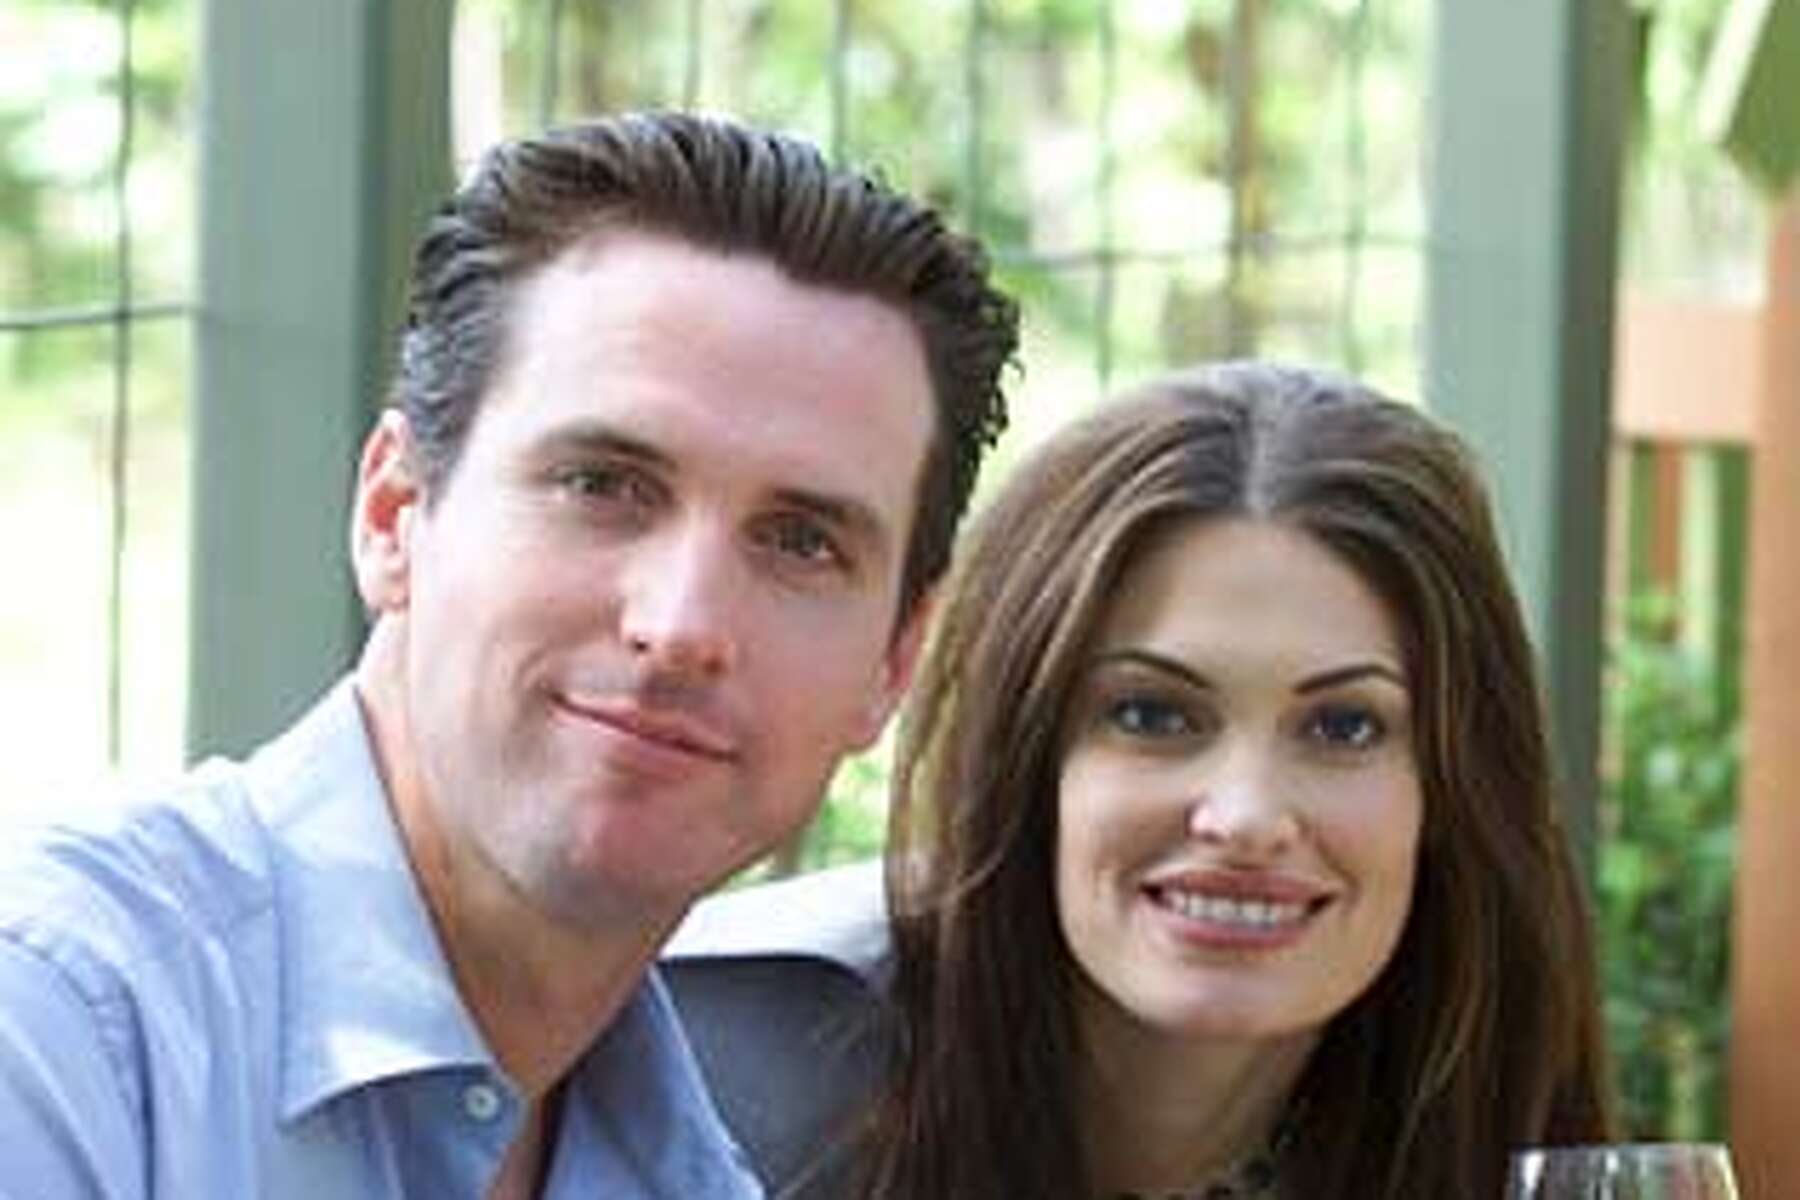 Newsom Wife Decide To End 3 Year Marriage Careers On Opposite Coasts Take Toll On Mayor Tv Star